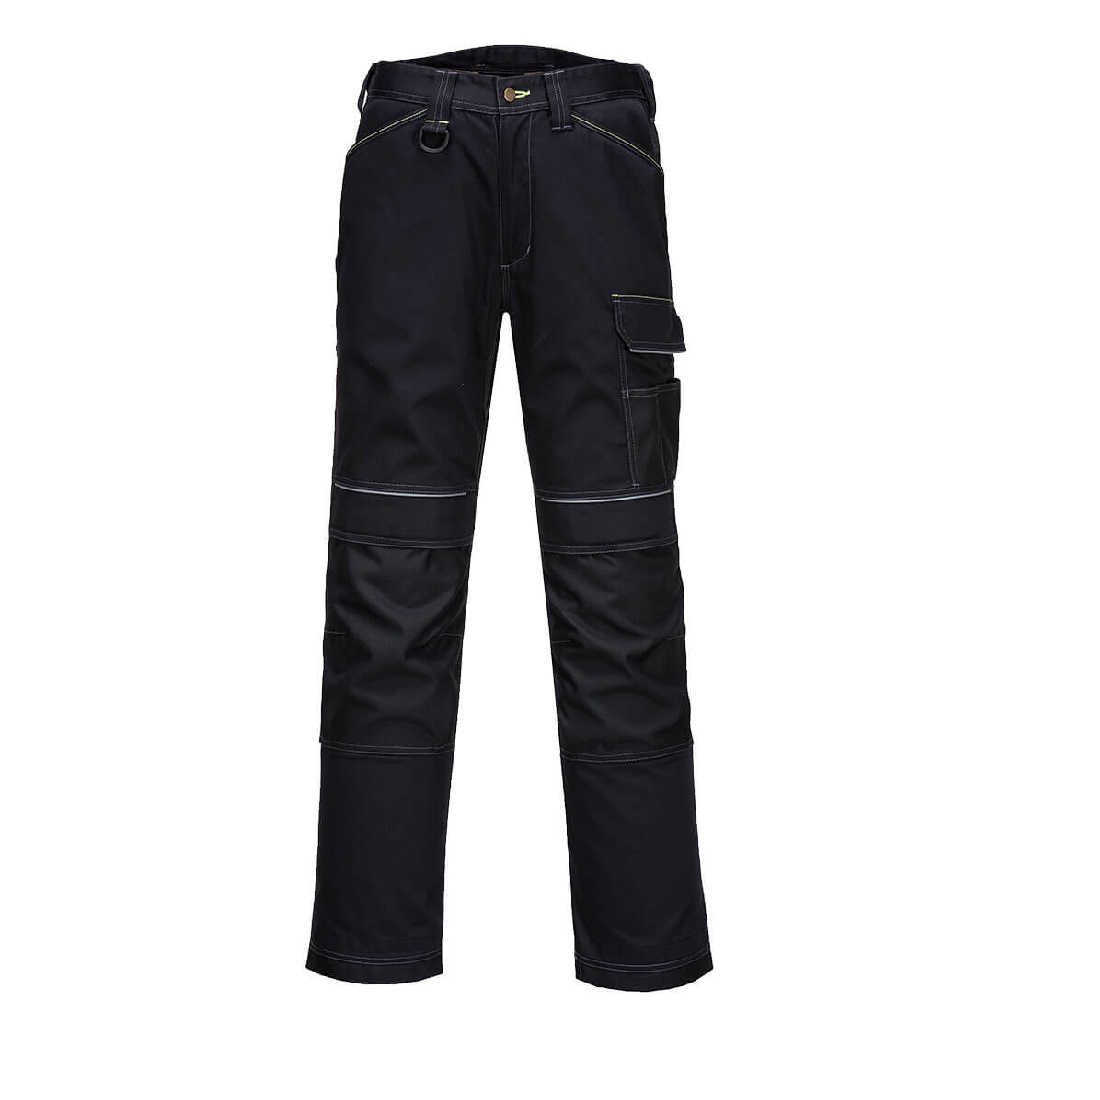 PW3 Lined Winter Work Trousers Black - PW358